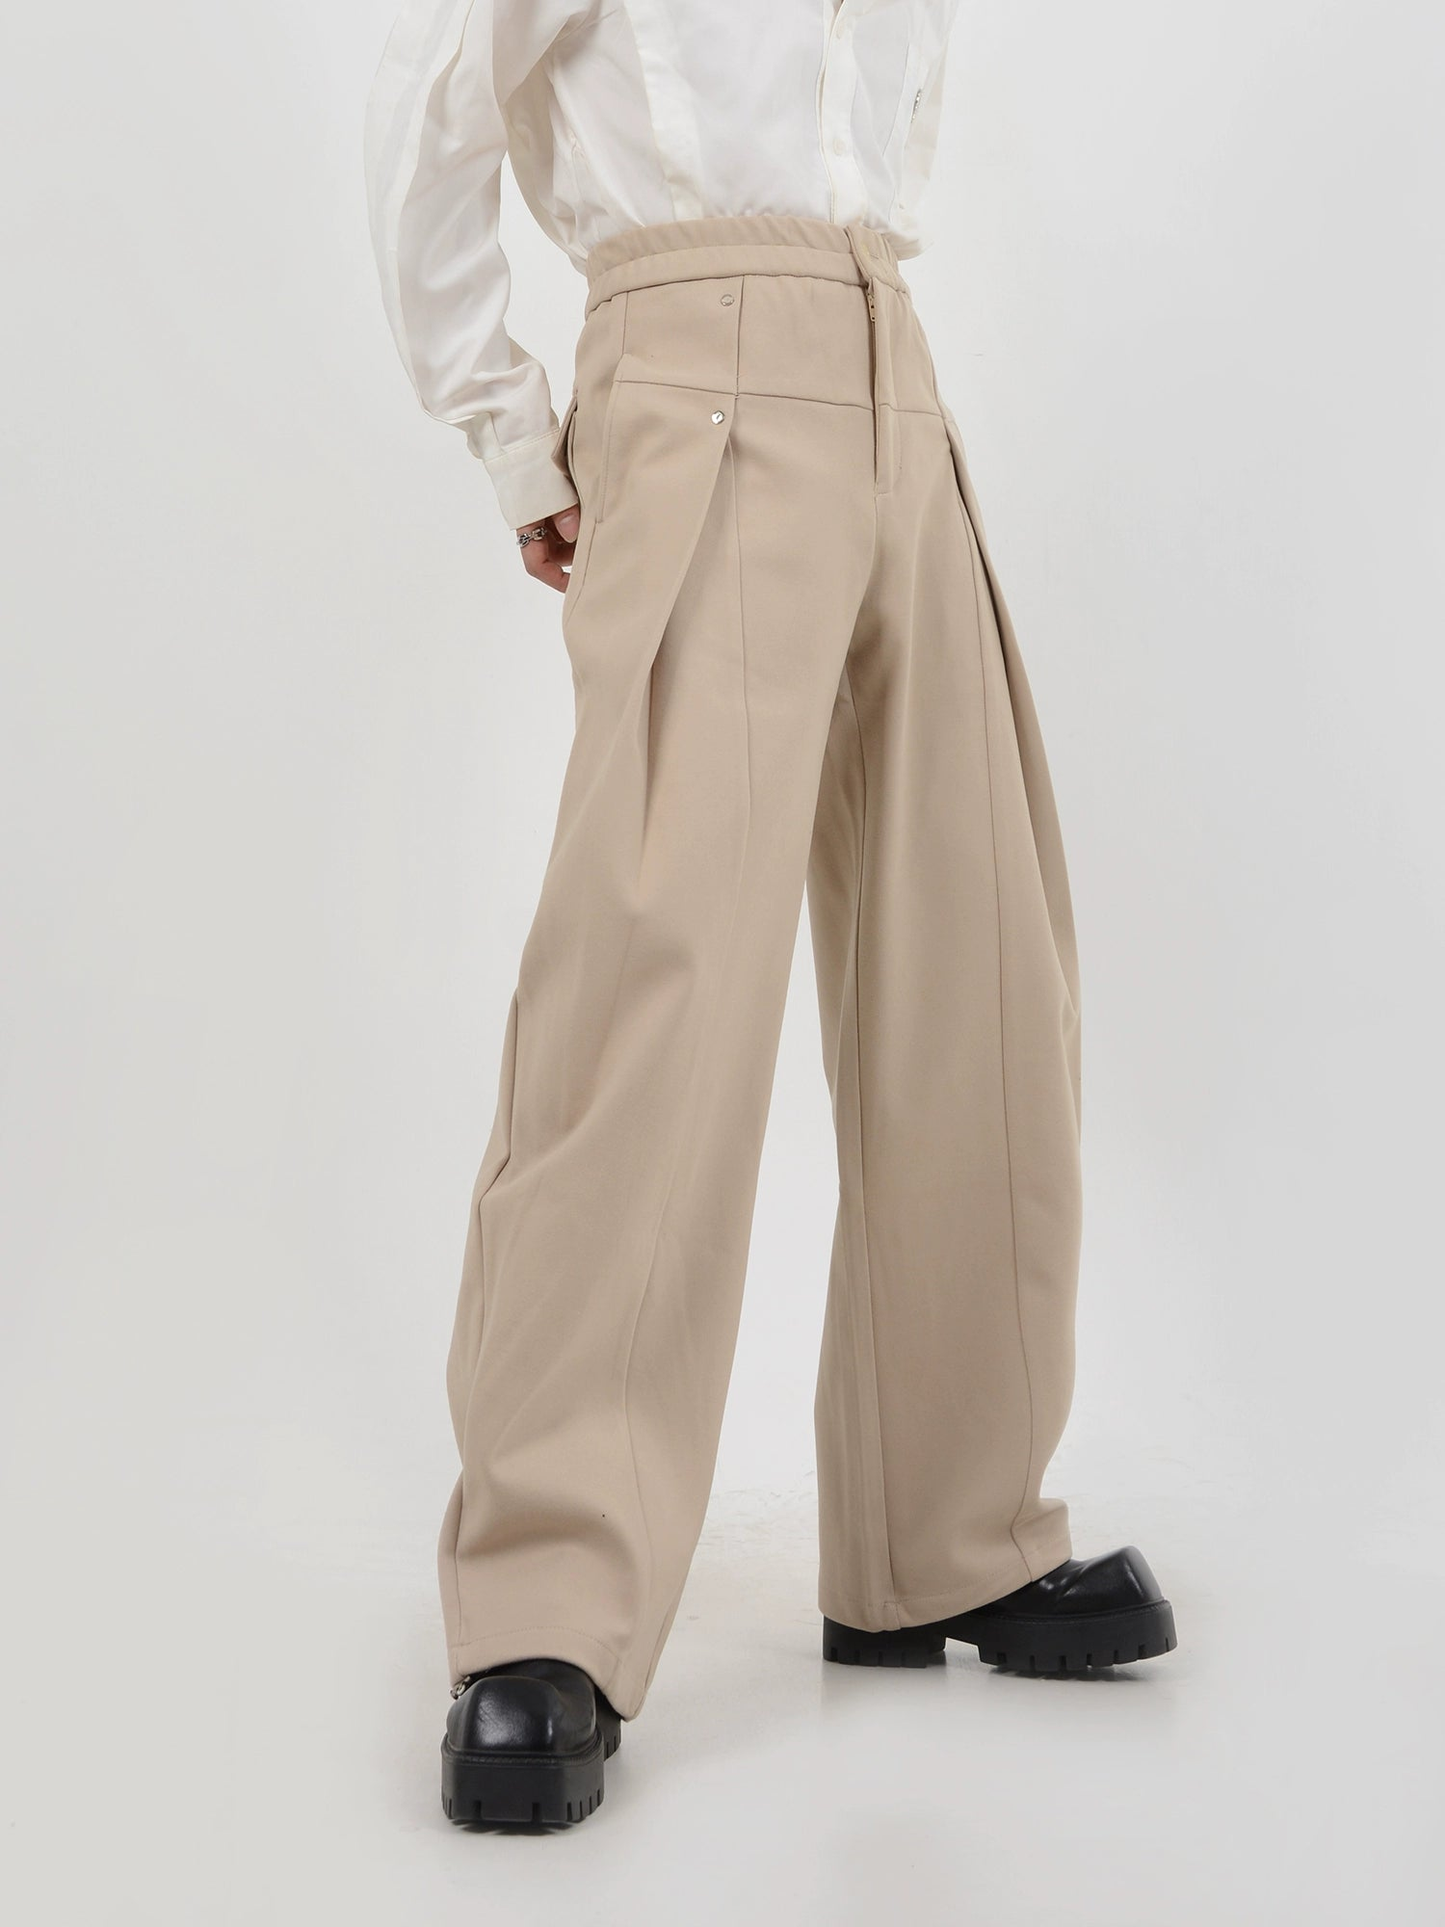 Loose Fit Straight Leg Casual Trousers WN4401